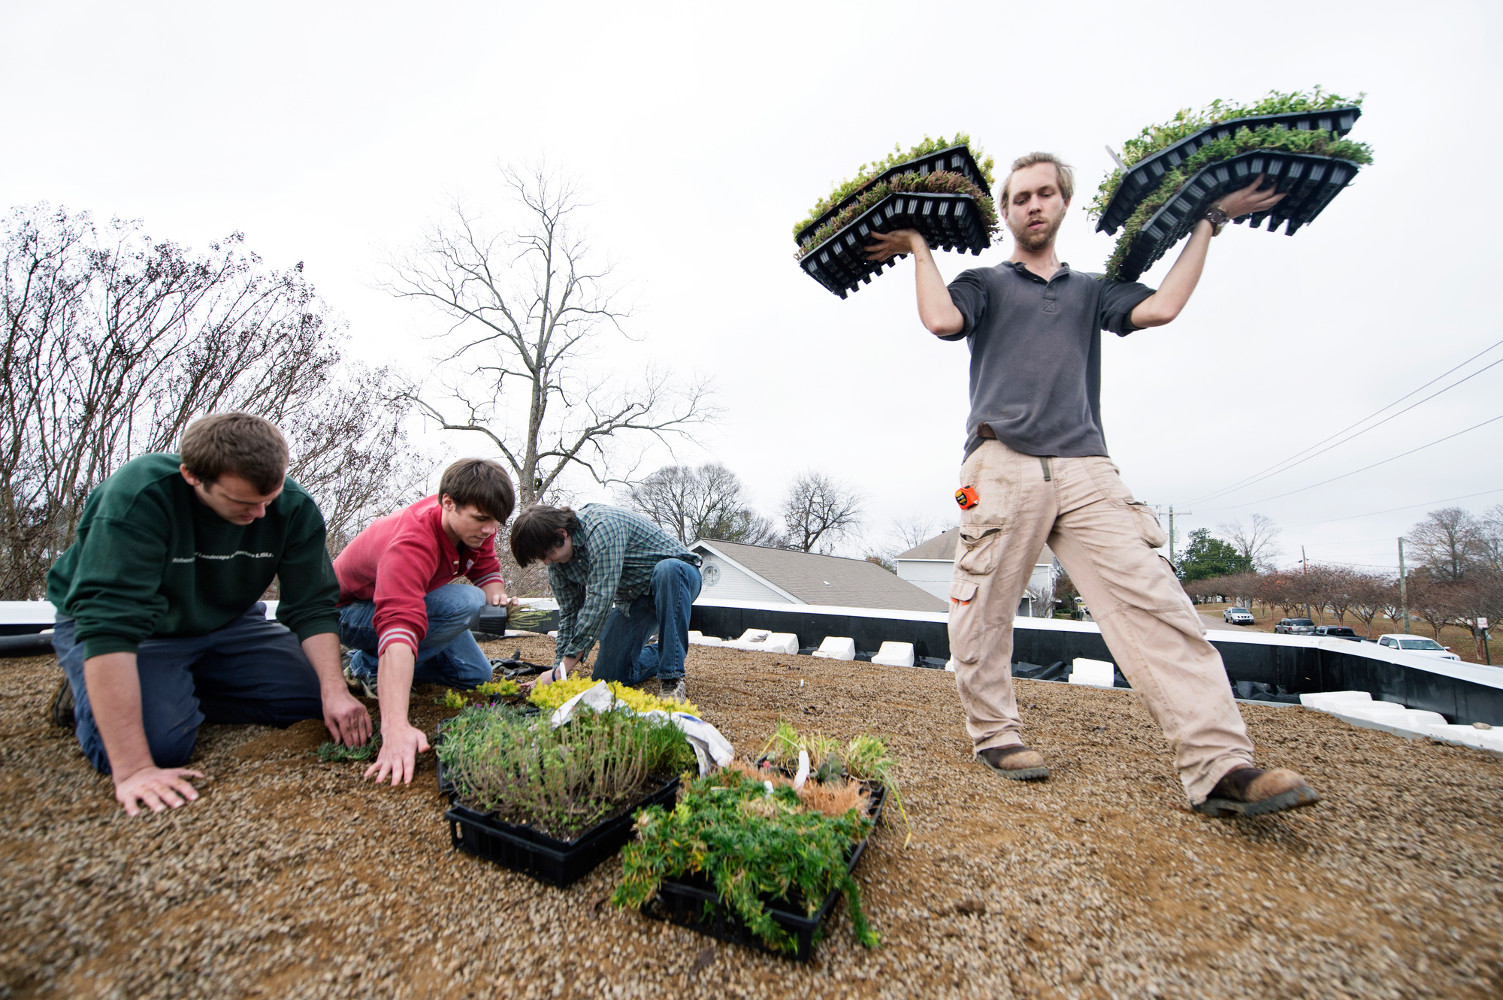 Mississippi State’s Department of Landscape Architecture is welcoming 750 students from 63 institutions of higher learning—along with industry professionals from more than 70 companies around the country—for the National Collegiate Landscape Competition Wednesday-Saturday [March 16-19] on the Starkville campus. (Photo by Megan Bean)